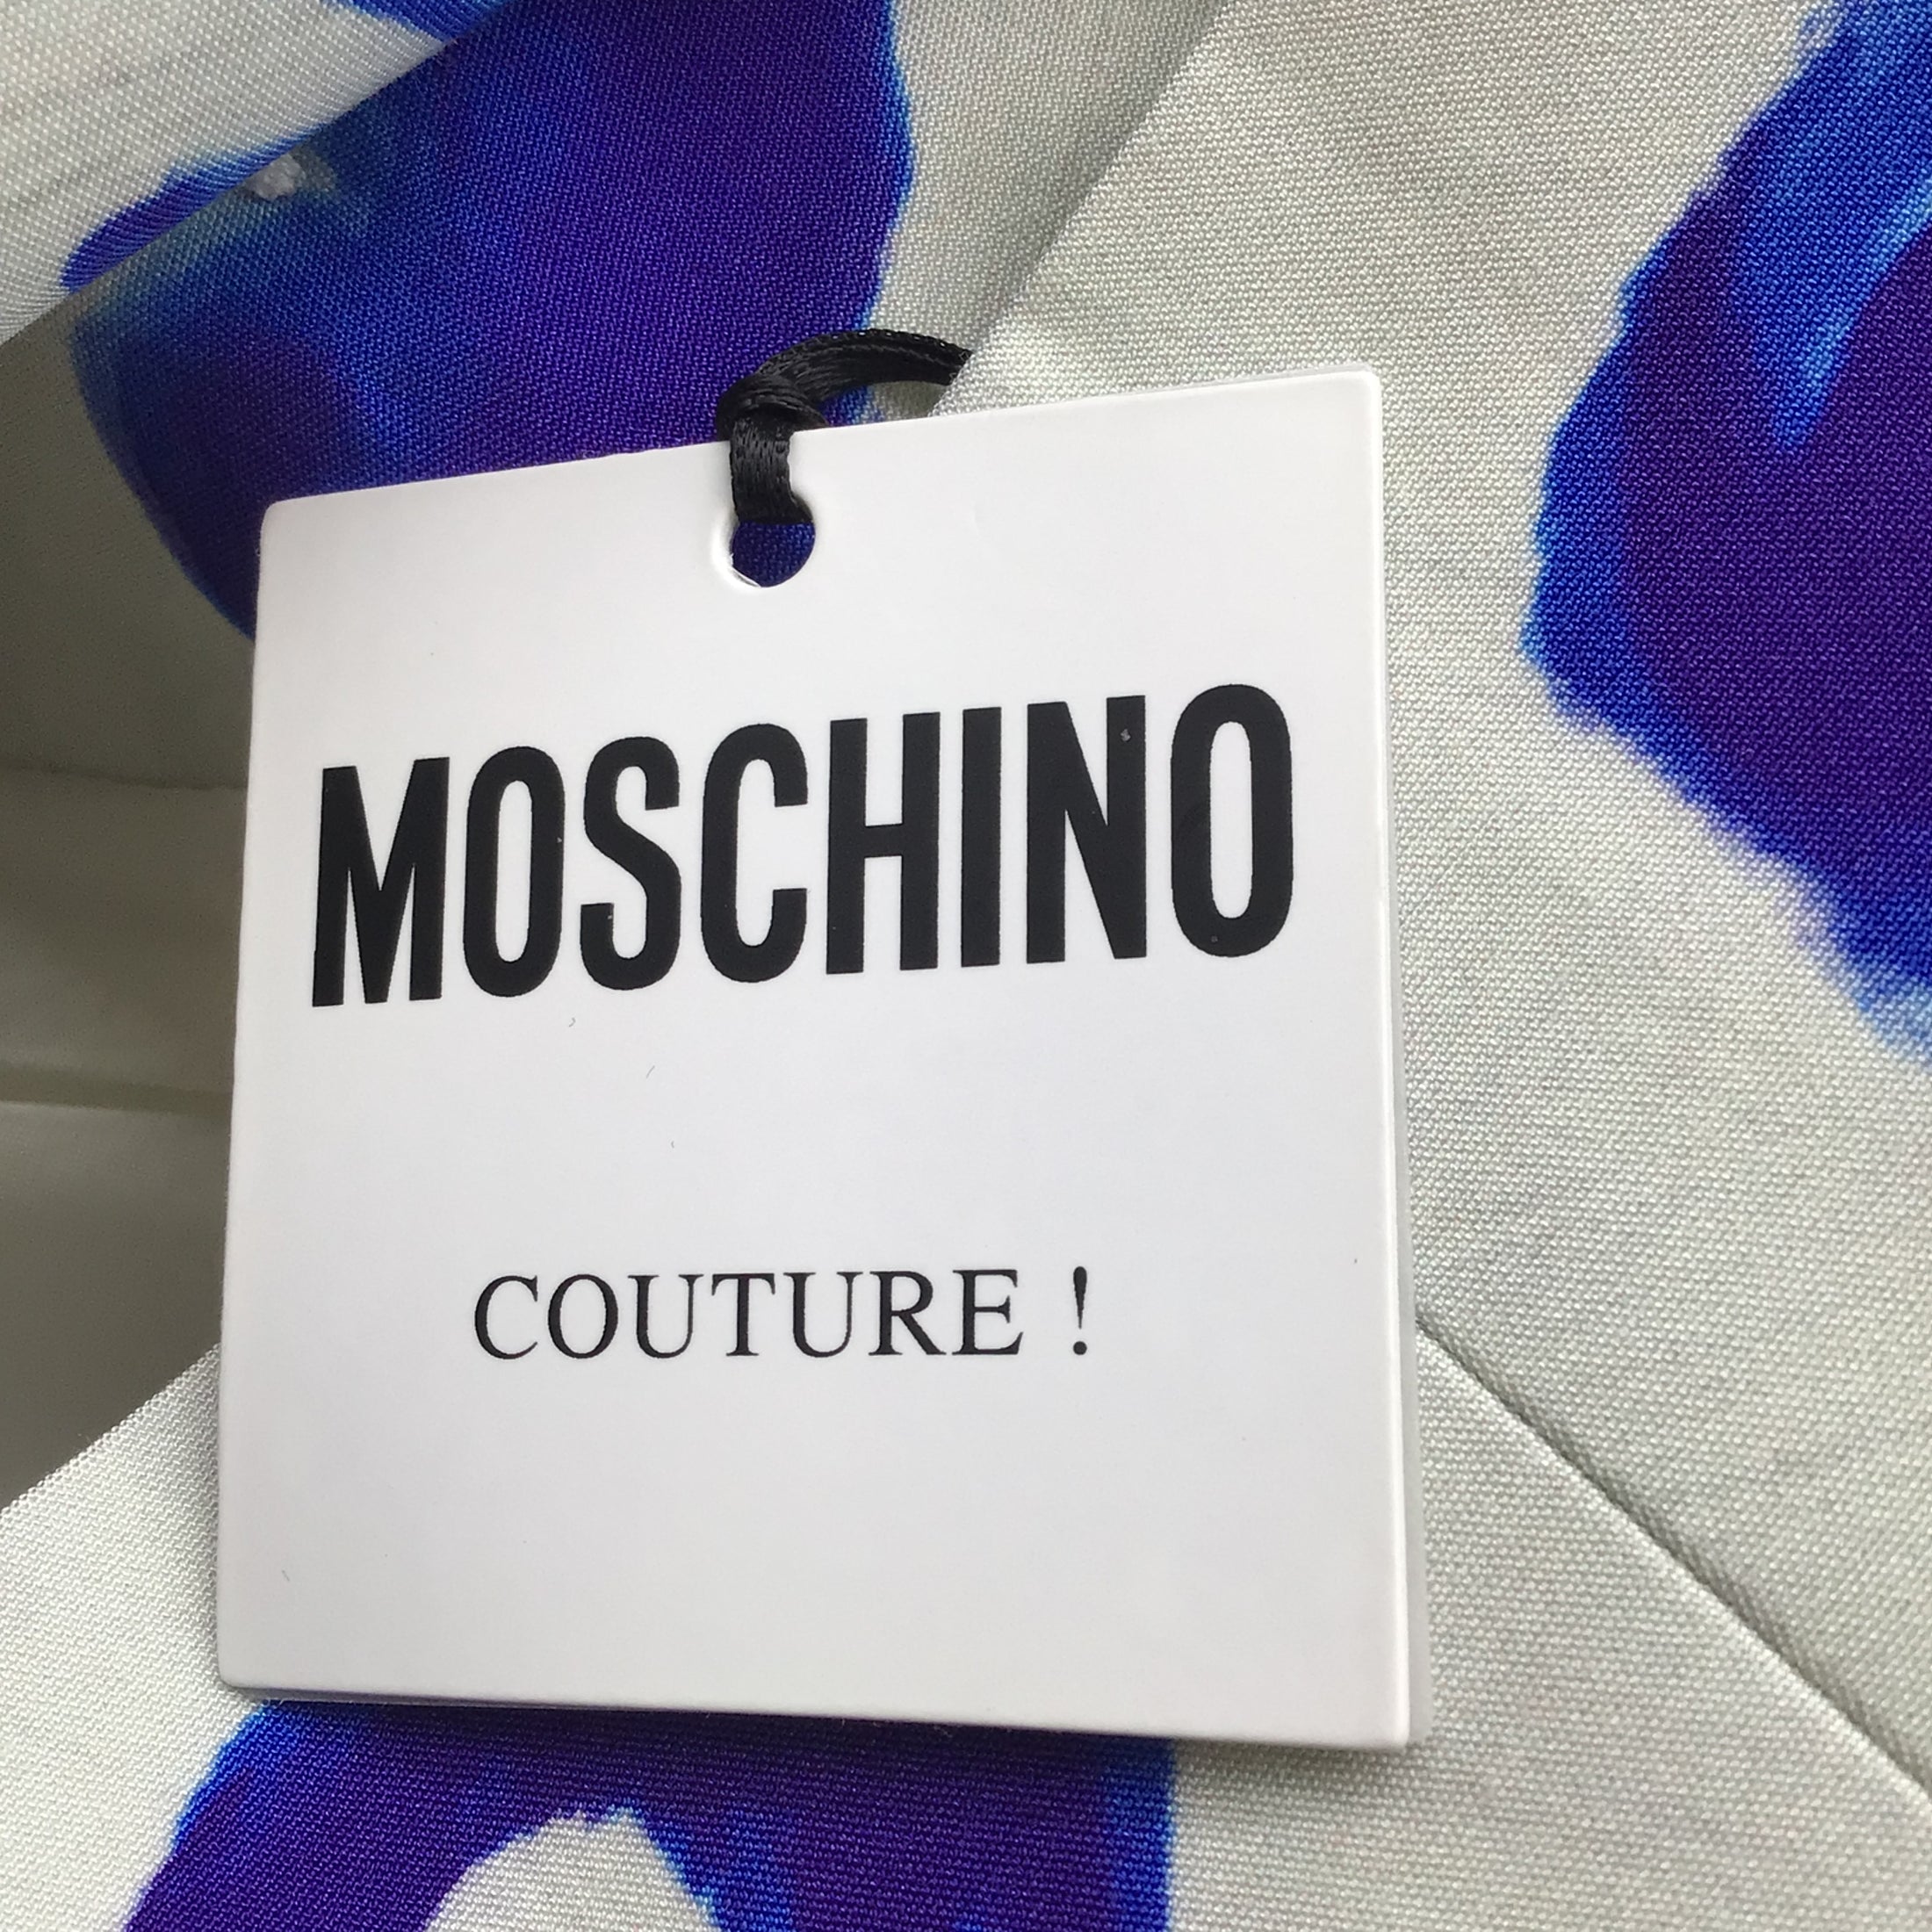 Moschino Couture Ivory / Blue / Yellow Multi Printed Crepe Blazer